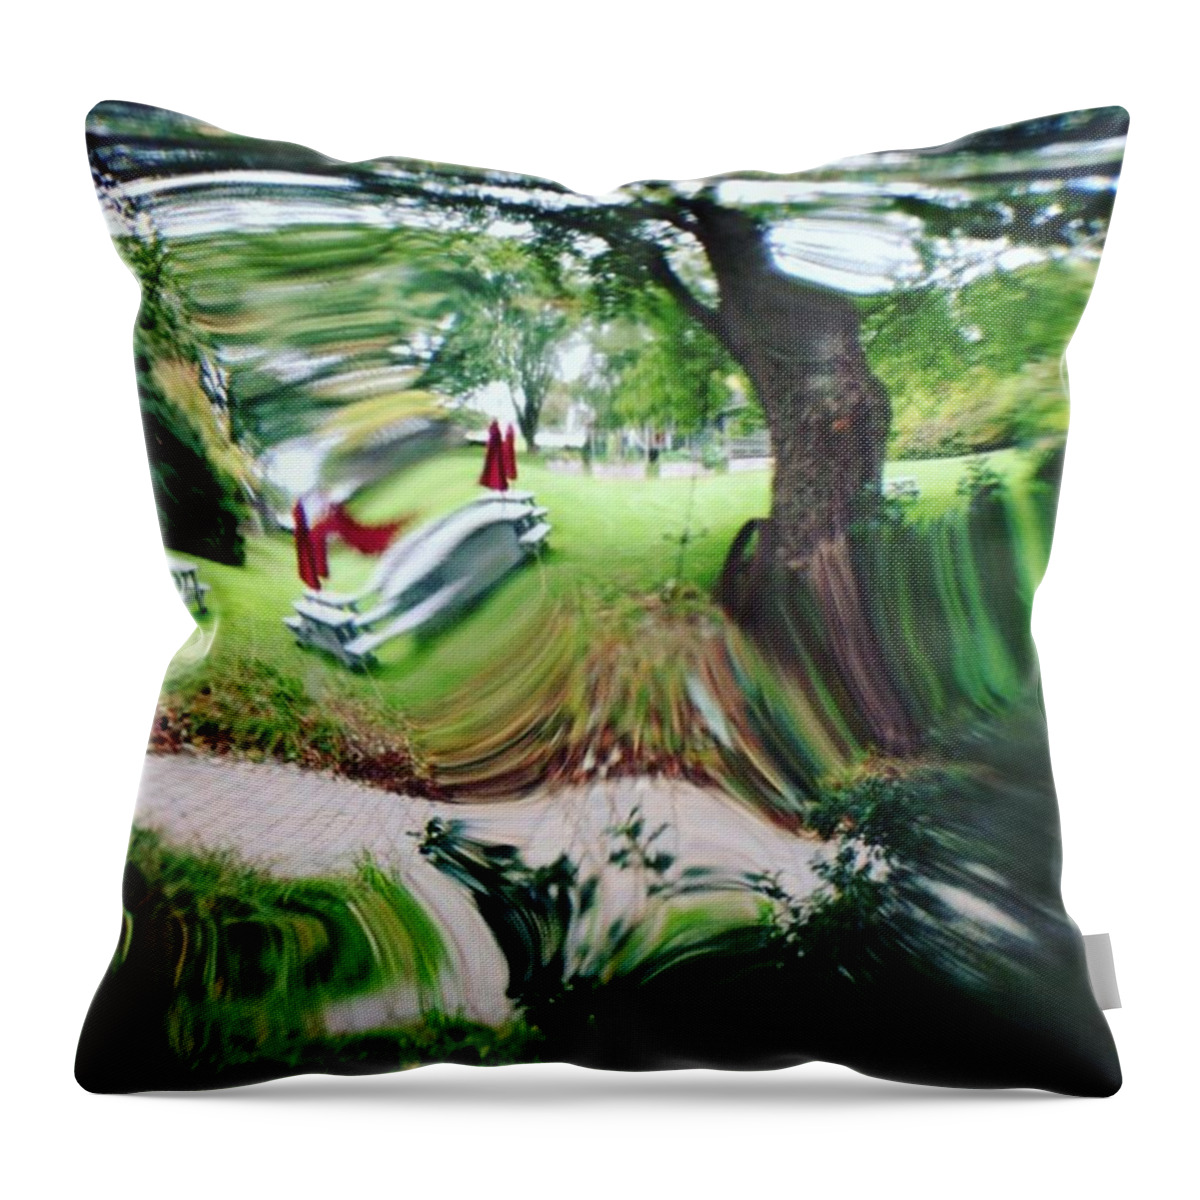 East Coast Throw Pillow featuring the photograph Through The Looking Glass by Kate Arsenault